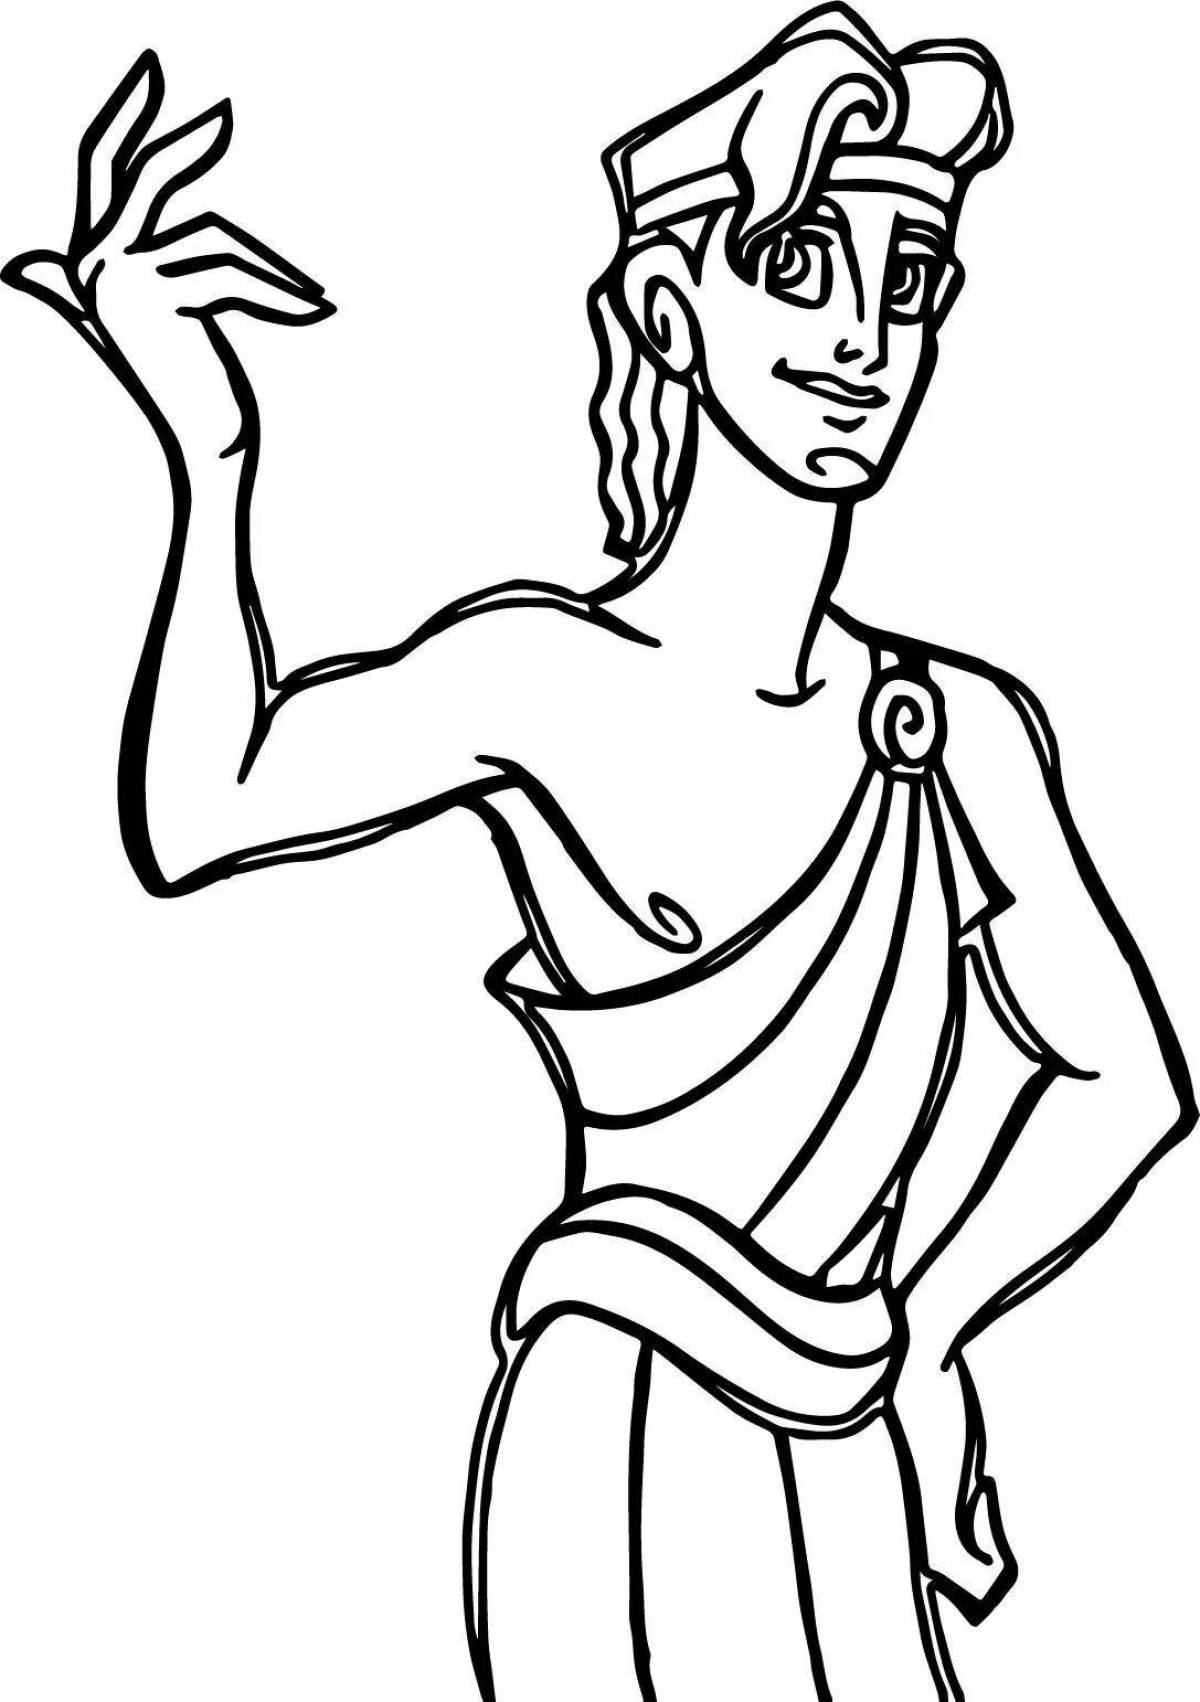 Great ancient greece coloring book for kids